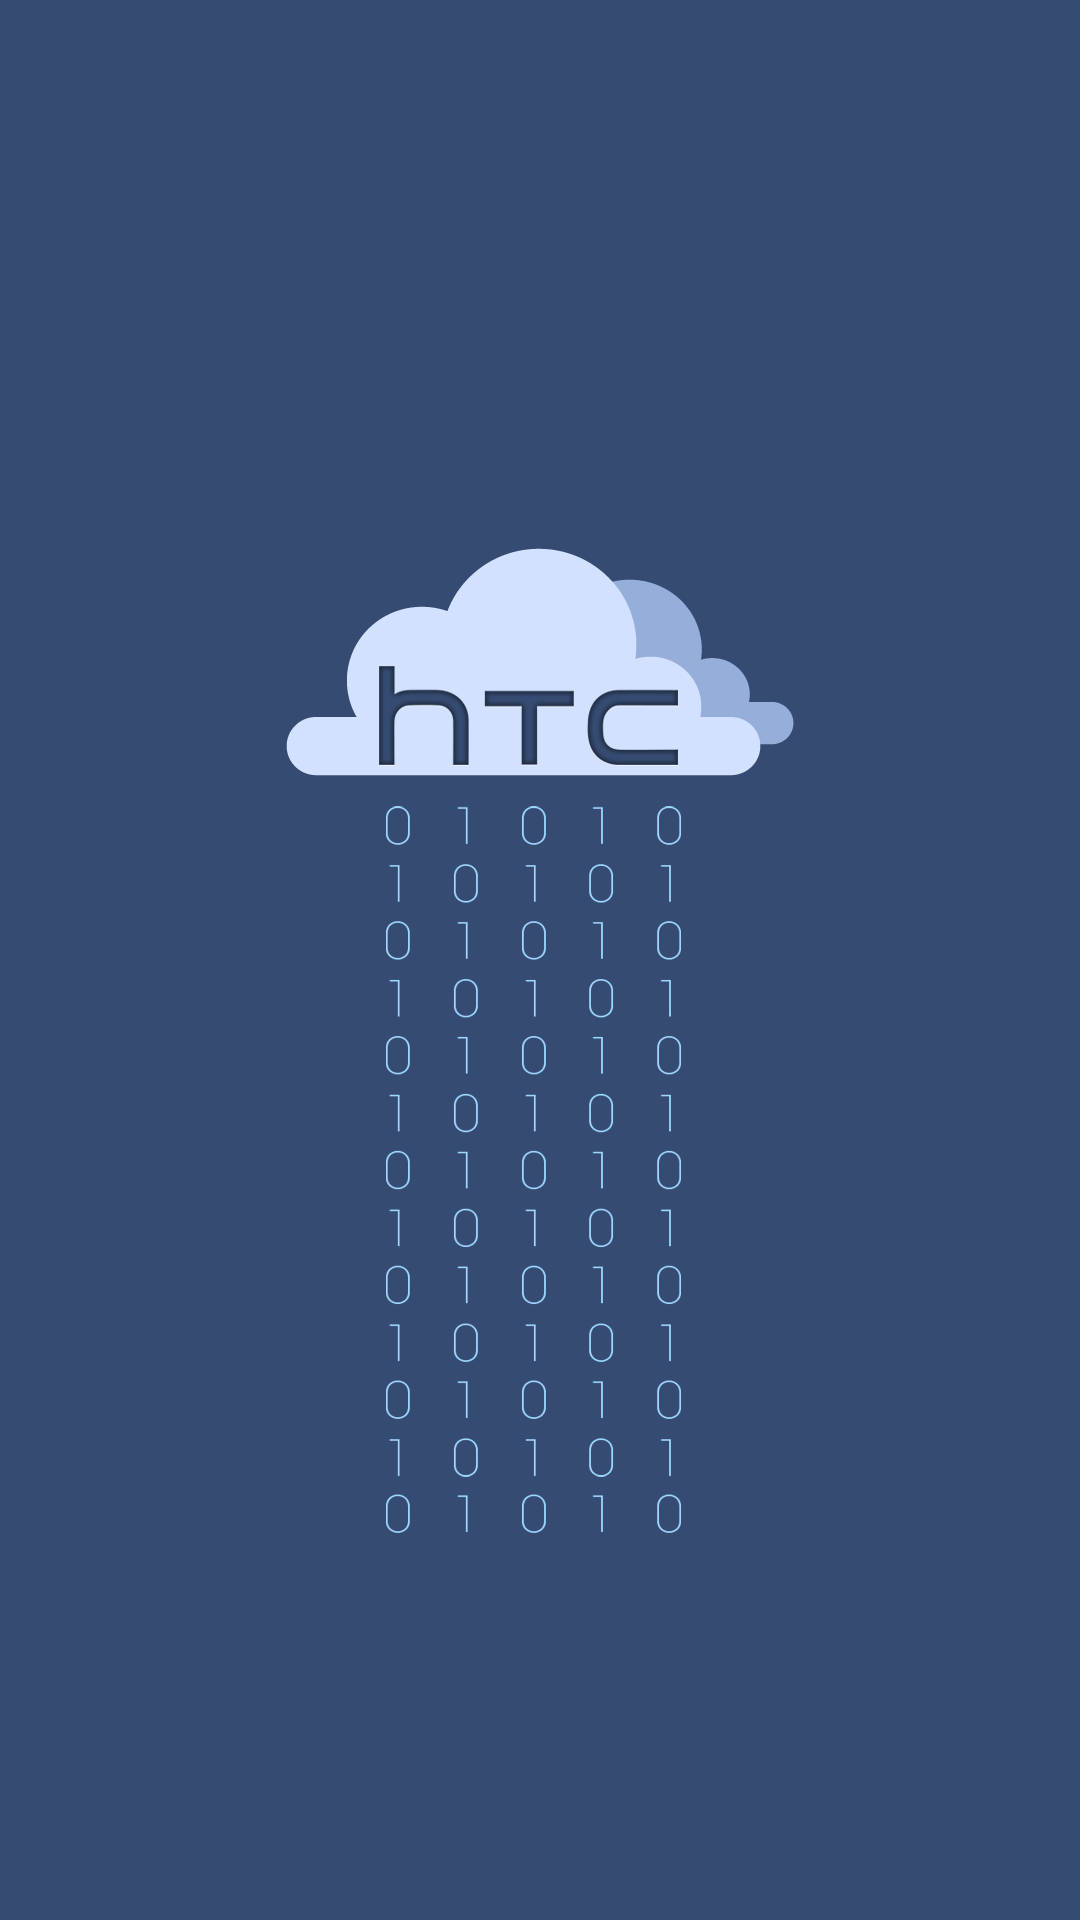 Free Htc Wallpaper Downloads, [100+] Htc Wallpapers for FREE | Wallpapers .com